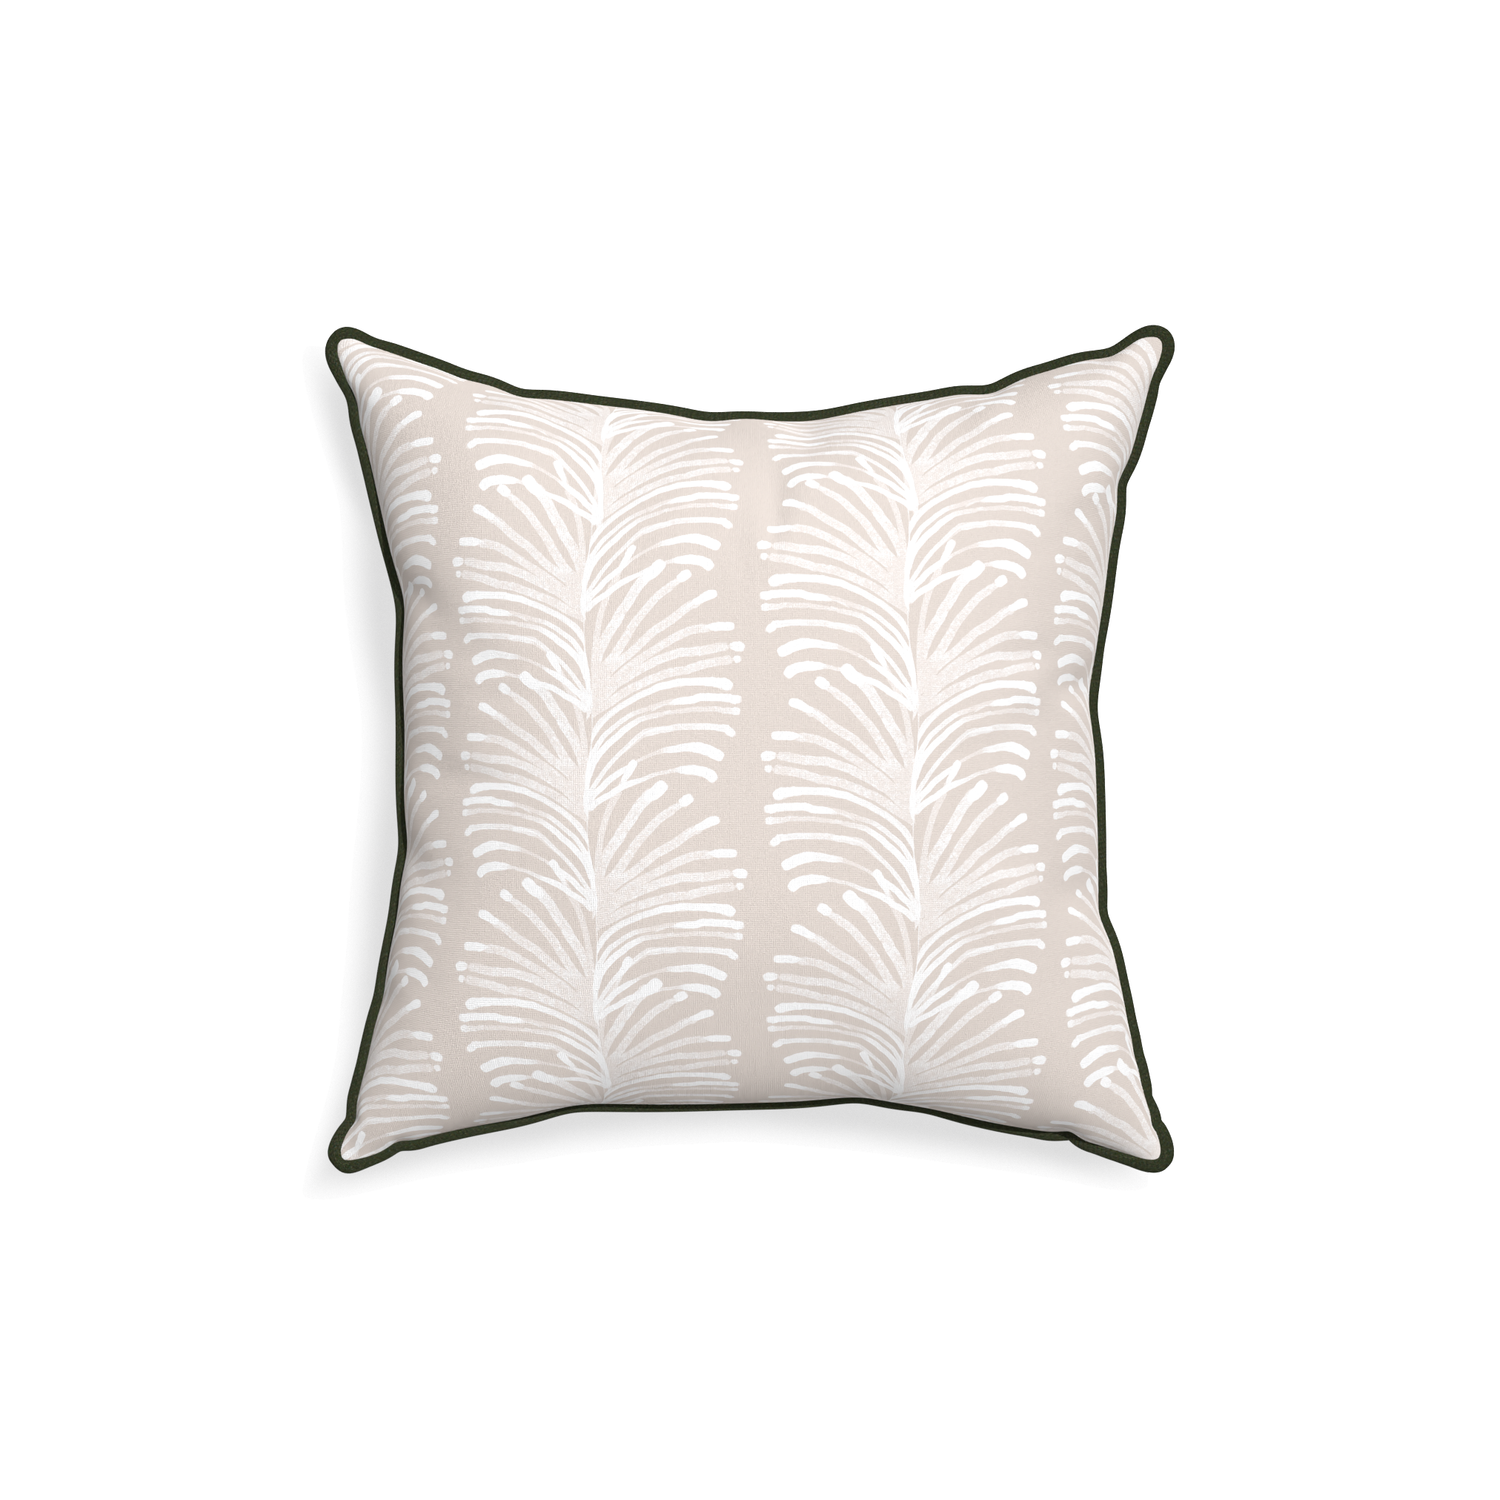 18-square emma sand custom sand colored botanical stripepillow with f piping on white background